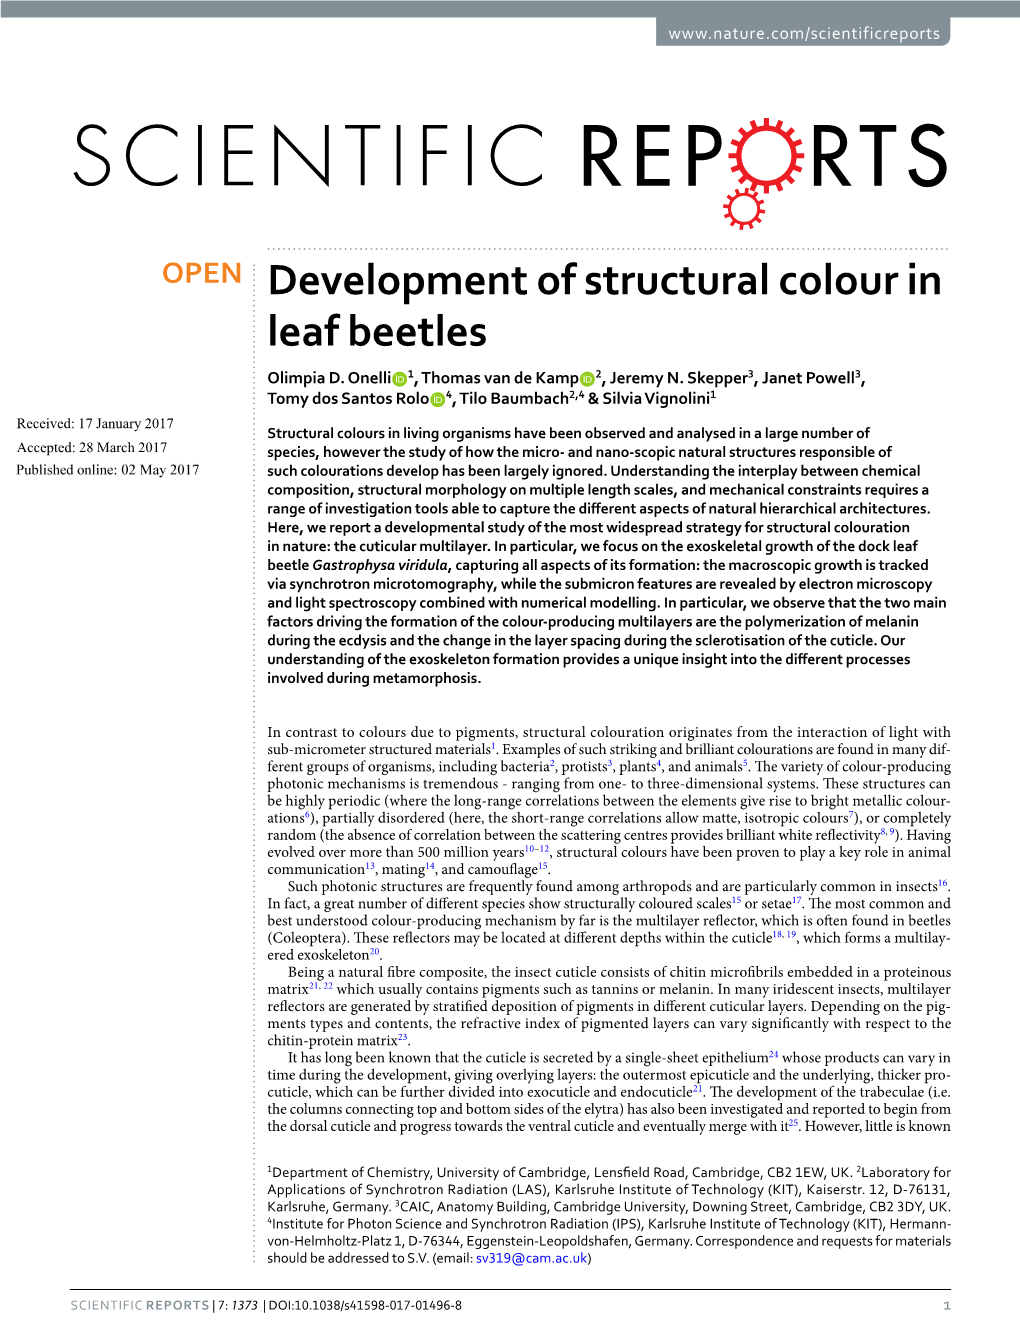 Development of Structural Colour in Leaf Beetles Olimpia D